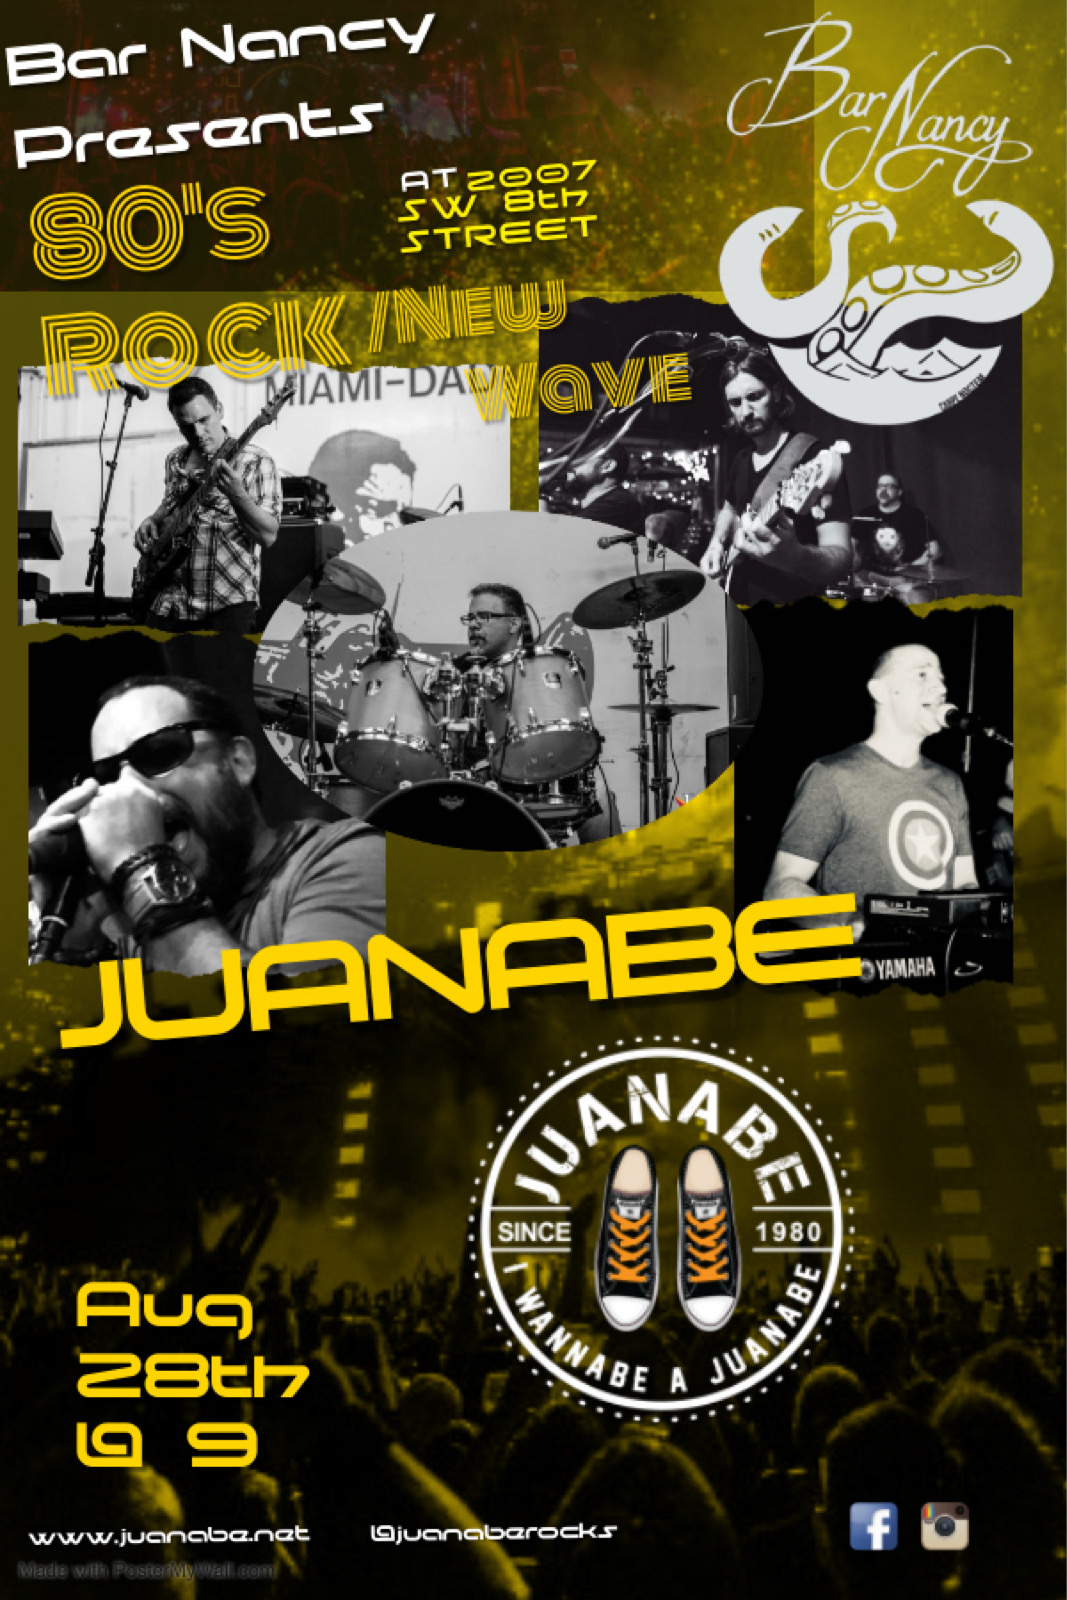 JUANABE - 80 ROCK - NEW WAVE at Bar Nancy - August 28th at 9PM